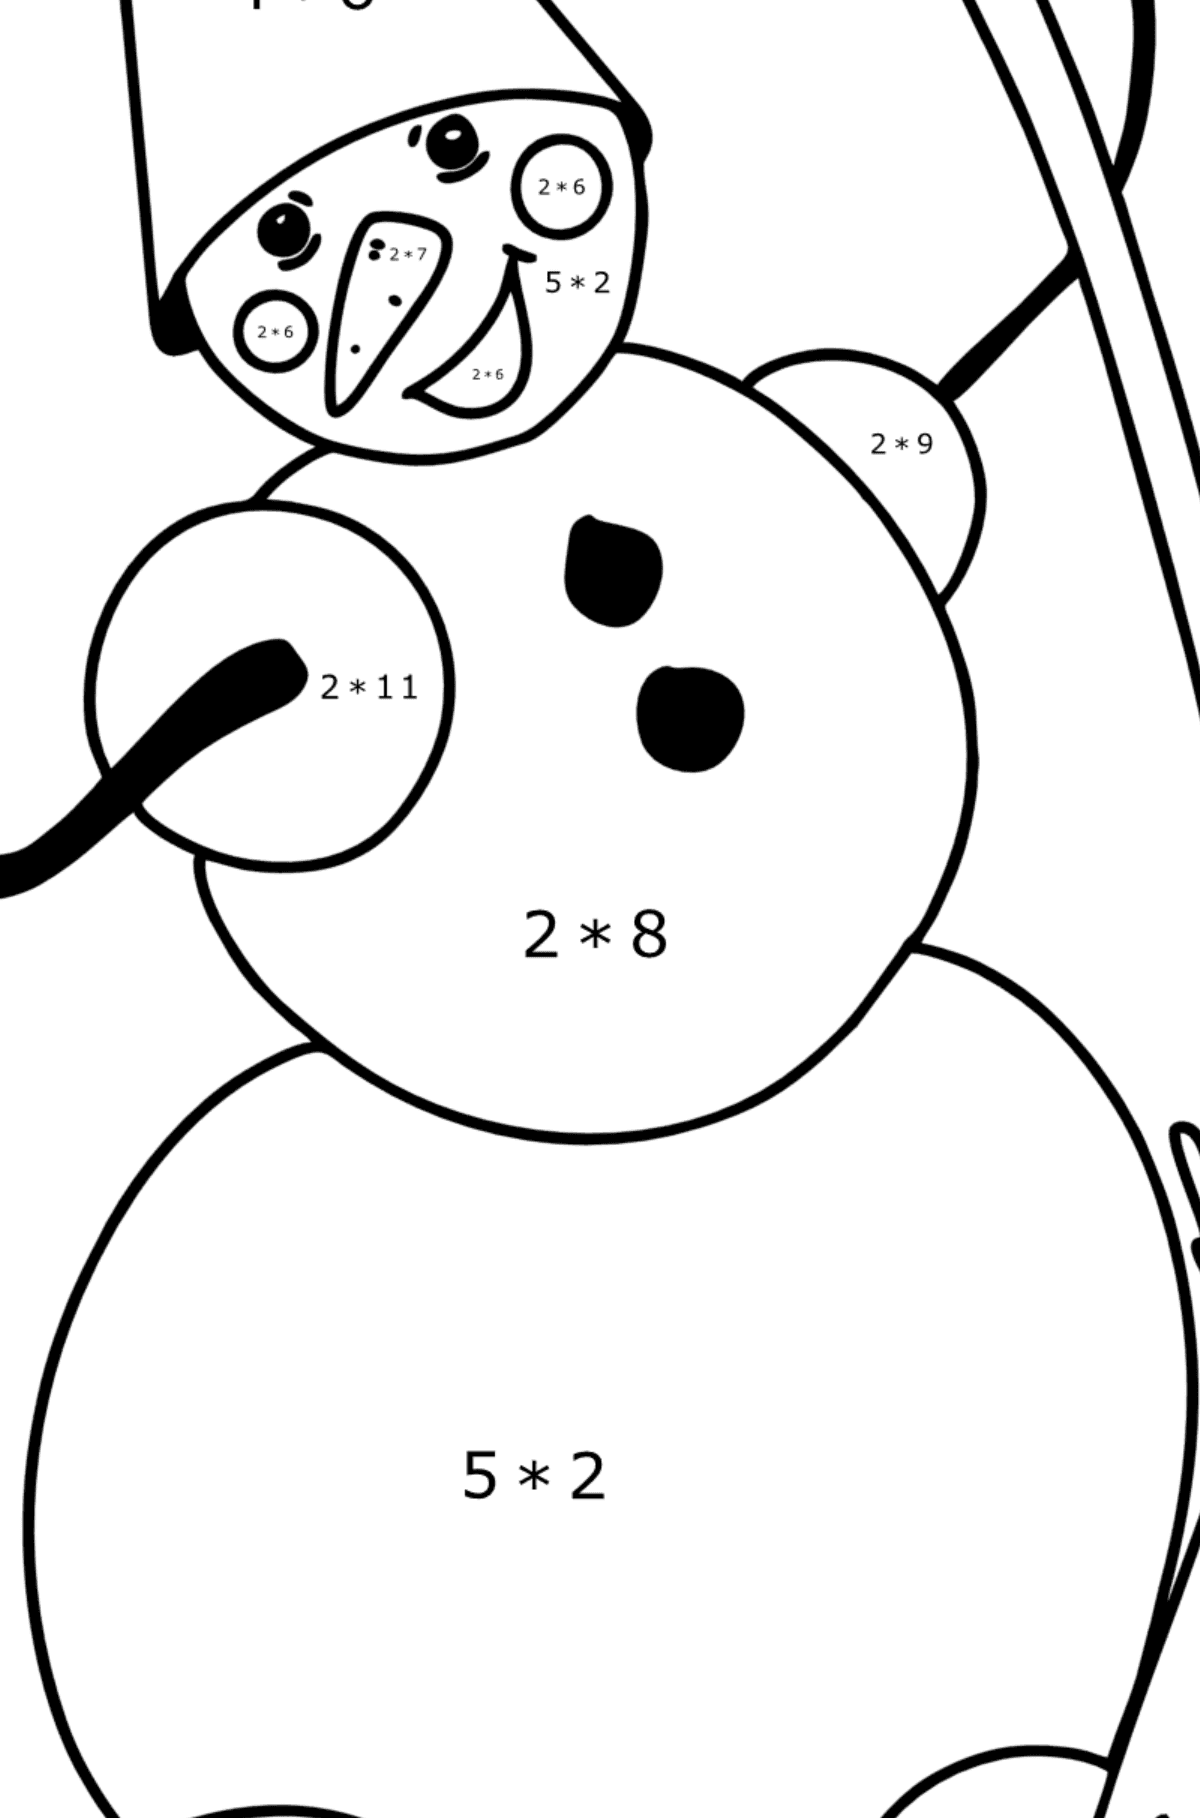 Snowman with Broom coloring page - Math Coloring - Multiplication for Kids